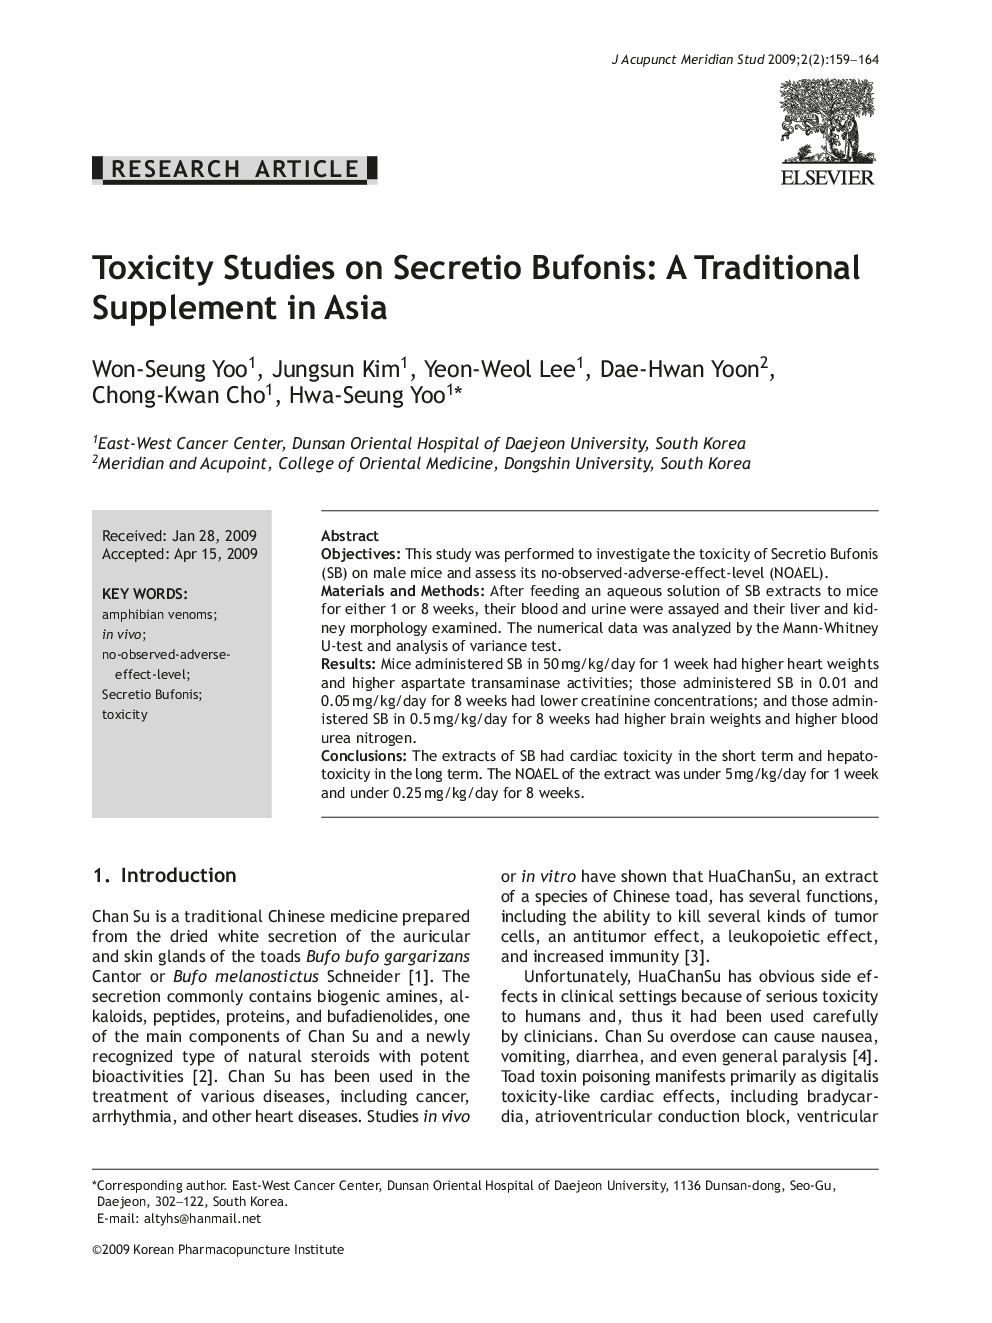 Toxicity Studies on Secretio Bufonis: A Traditional Supplement in Asia